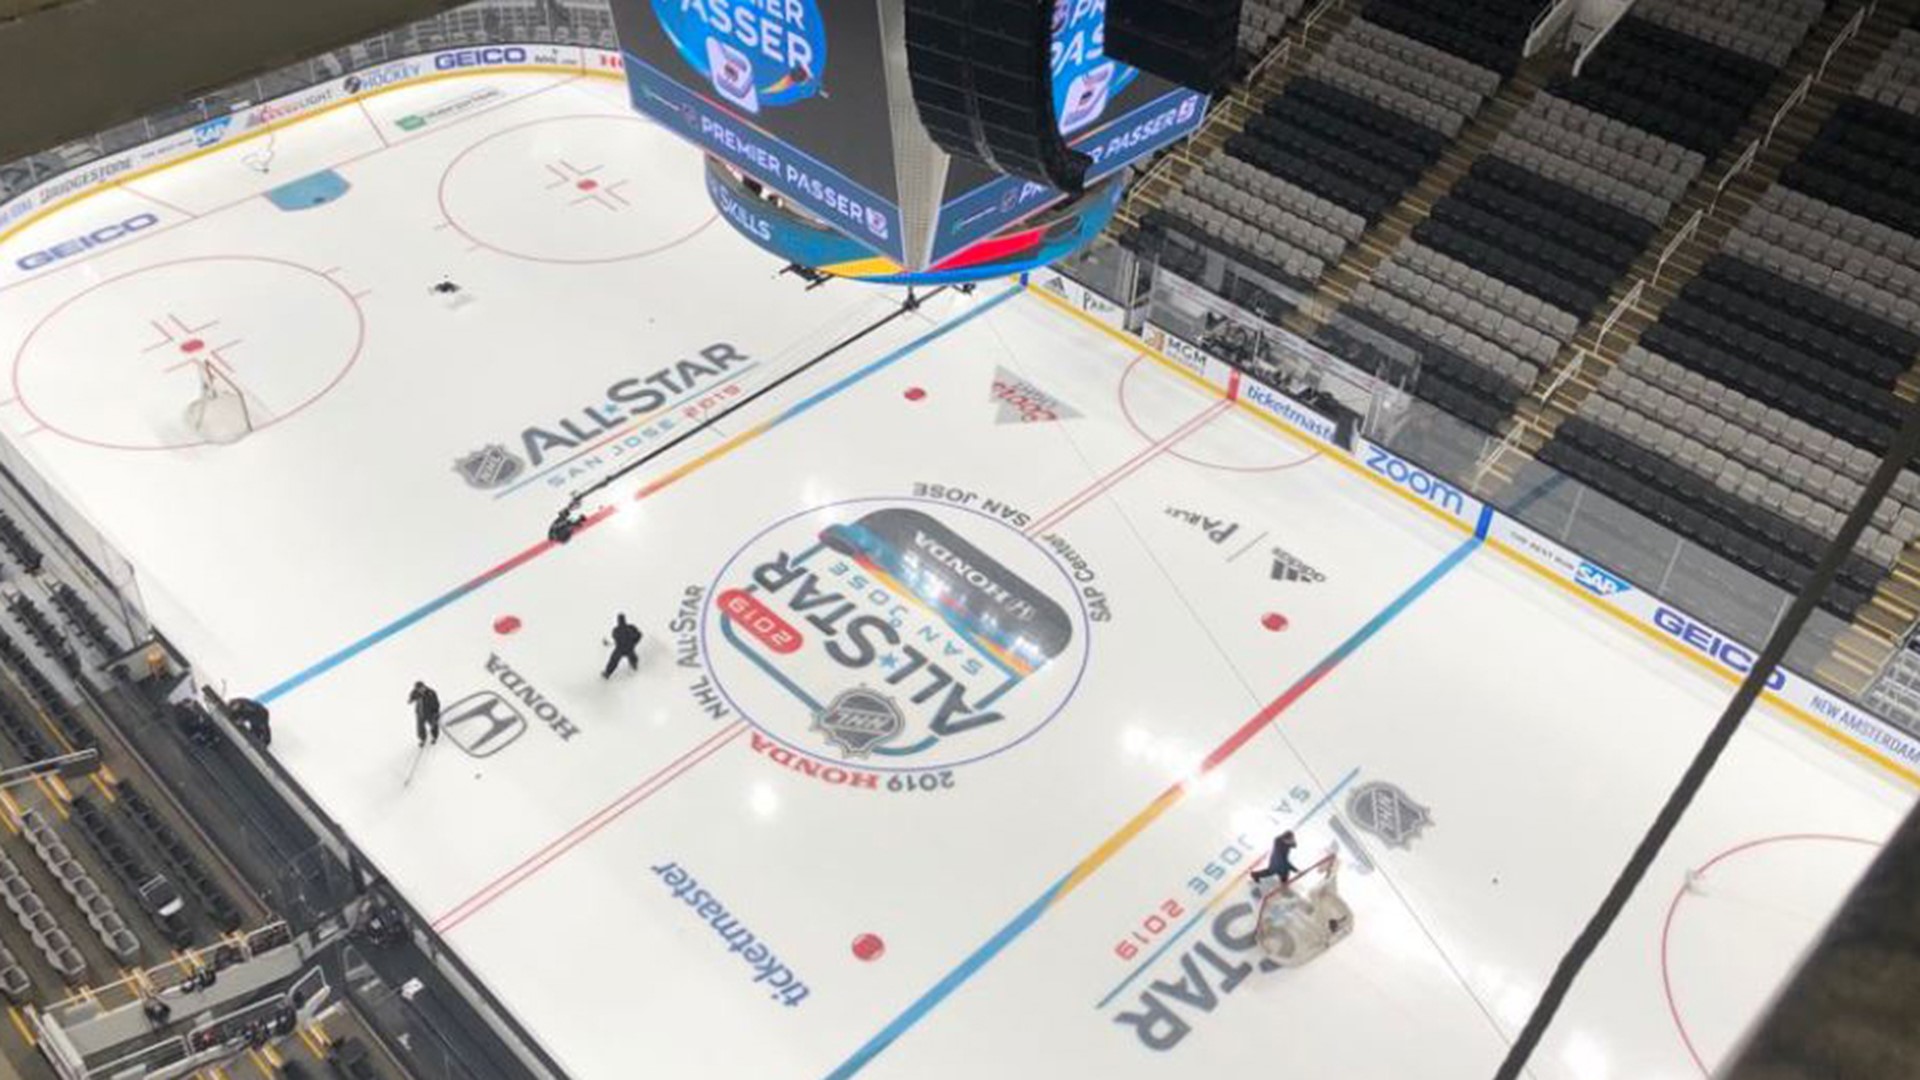 What would Seattle need to host an NHL All-Star Game? king5